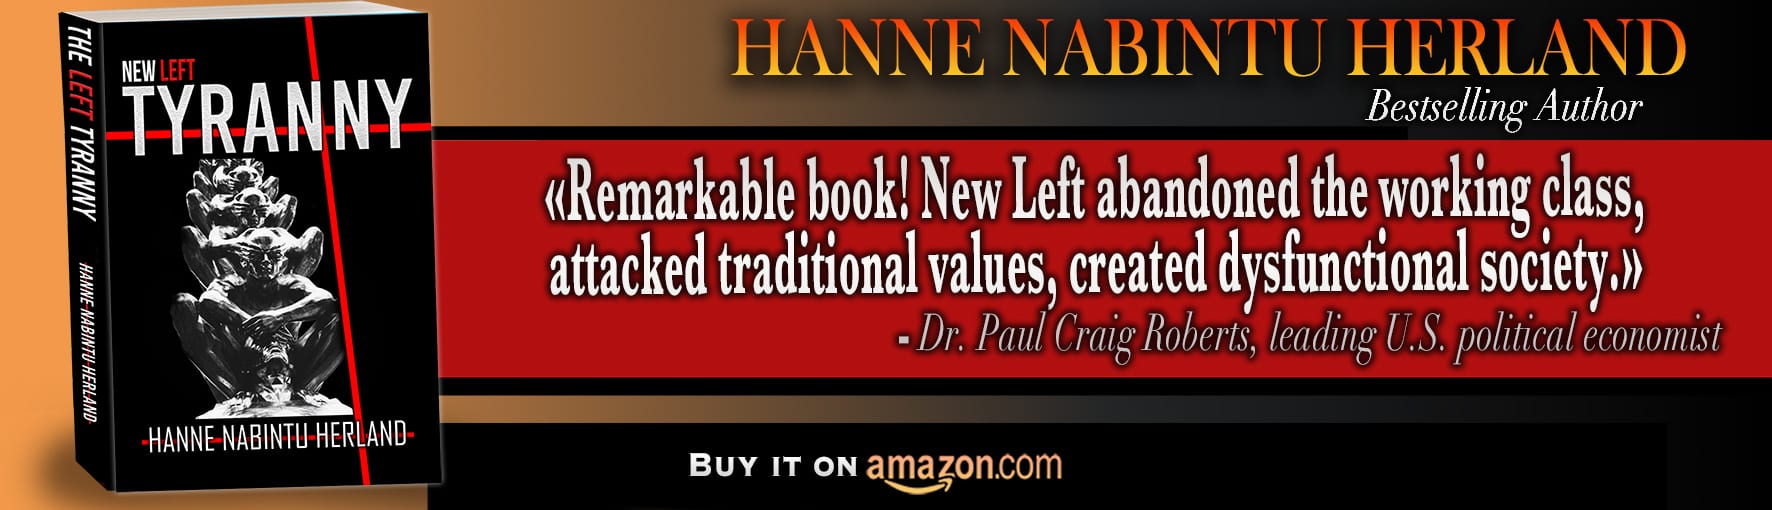 New Left Tyranny, by bestselling authorHanne Herland